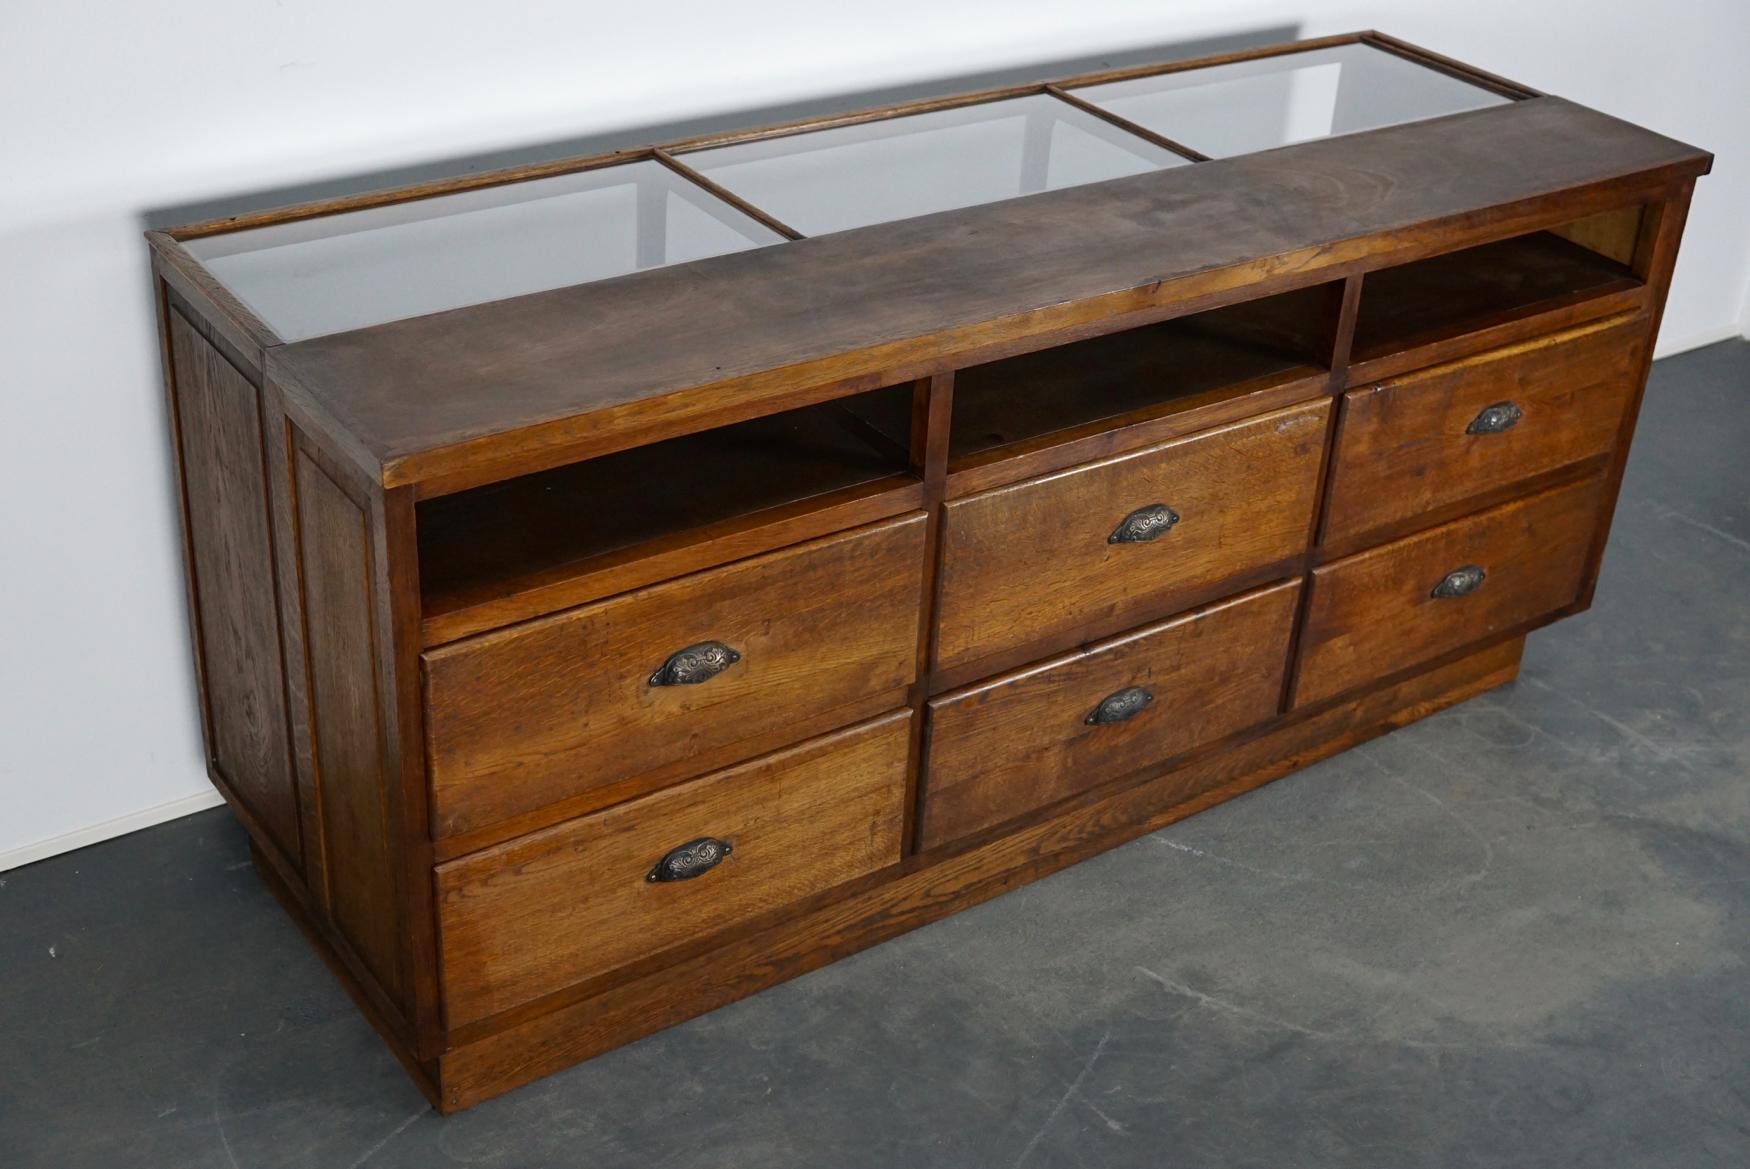 Industrial French Oak Haberdashery Cabinet or Shop Counter, 1930s